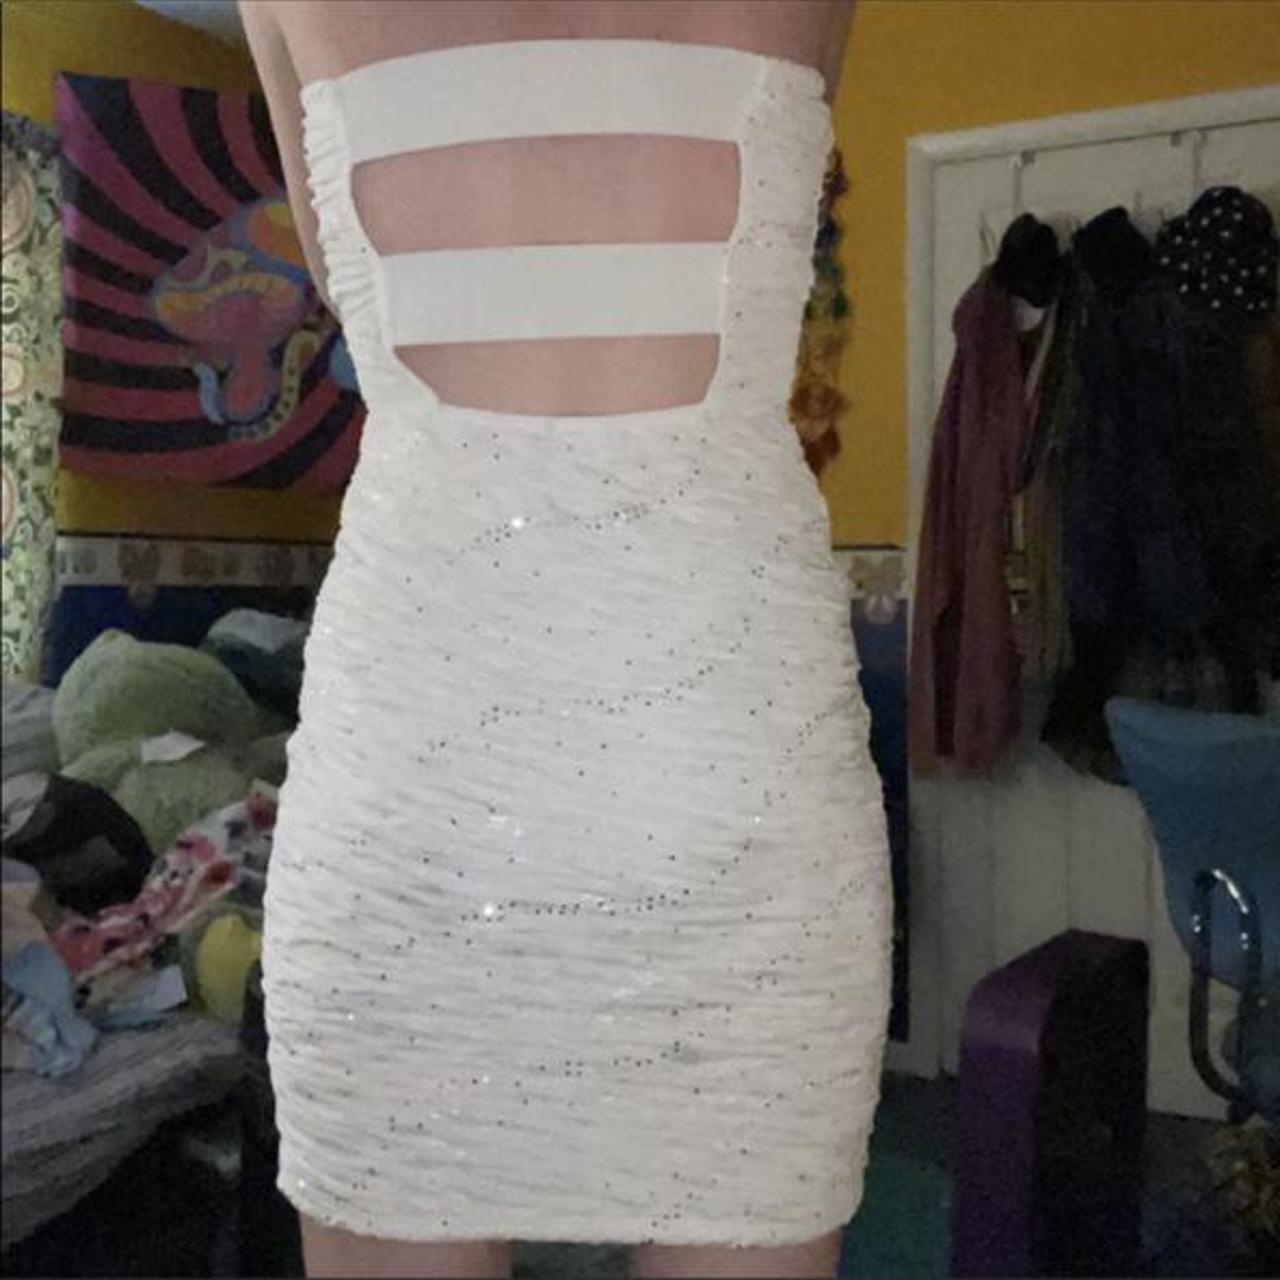 Product Image 4 - White Party Dress

‼️Depop Payments Only‼️

A